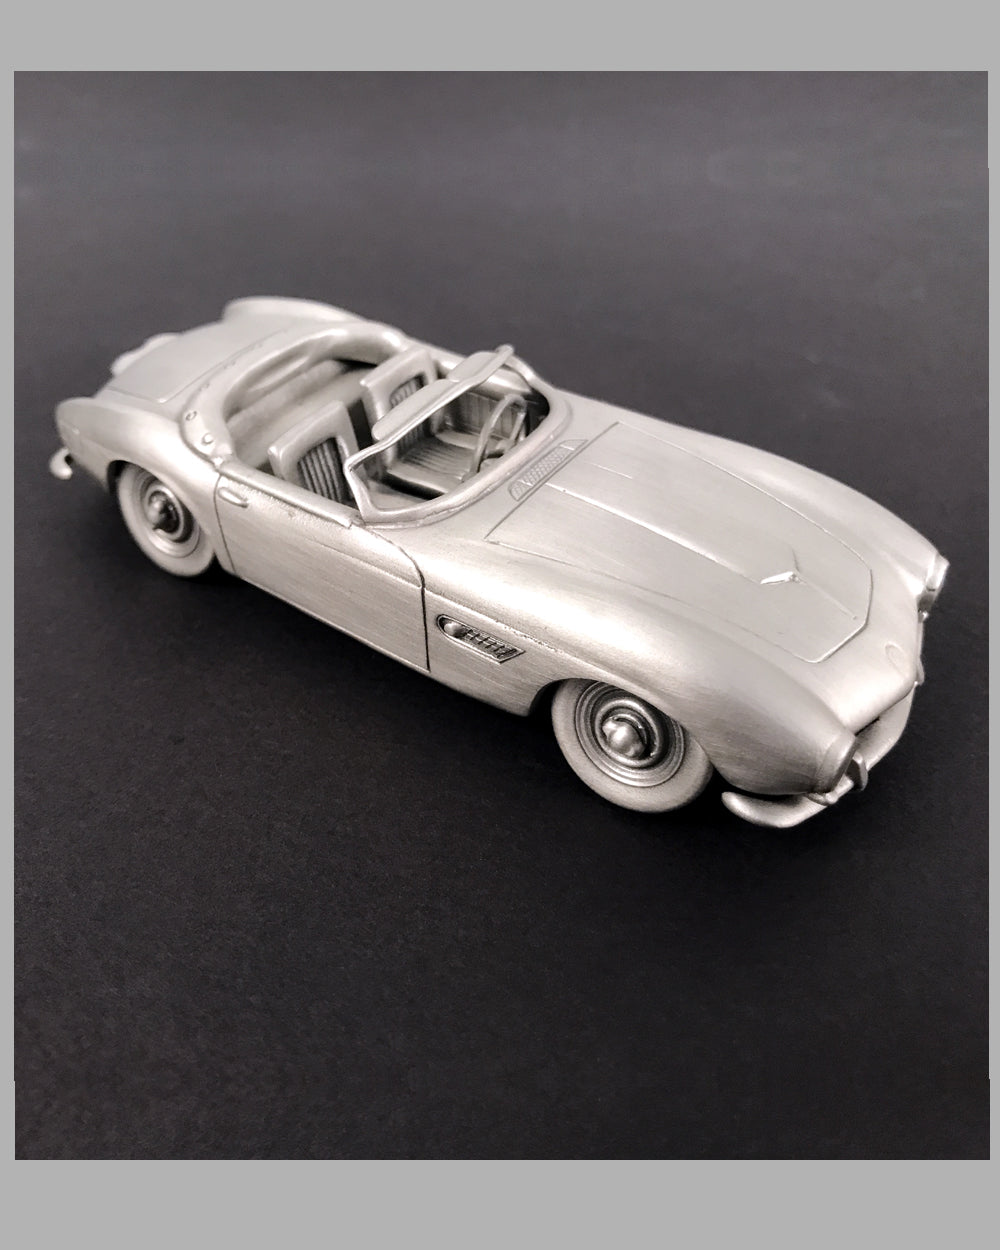 1957 BMW 507 pewter sculpture model by The Danbury Mint